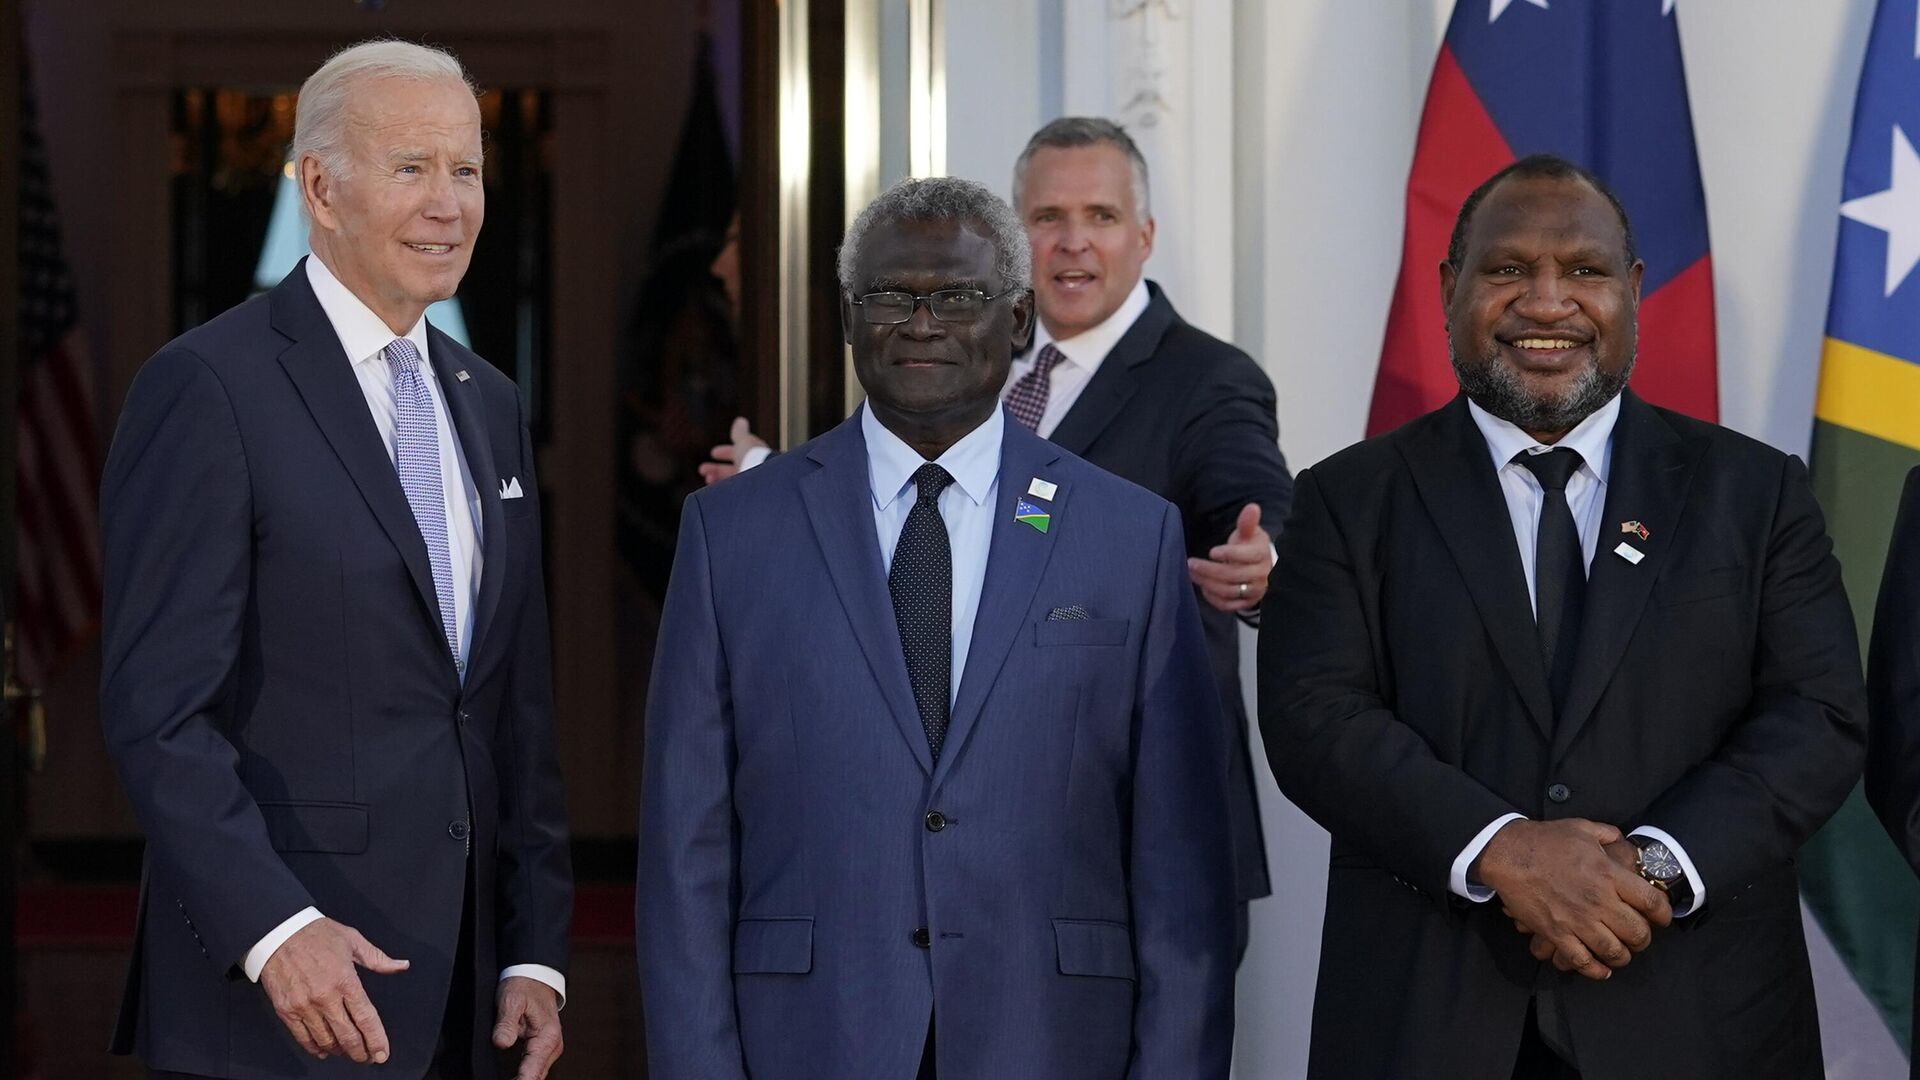 President Joe Biden poses for photos with Pacific Island leaders including Solomon Islands Prime Minister Manasseh Sogavare, center, and Papua New Guinea Prime Minister James Marape on the North Portico of the White House in Washington, Sept. 29, 2022. - Sputnik India, 1920, 17.05.2023